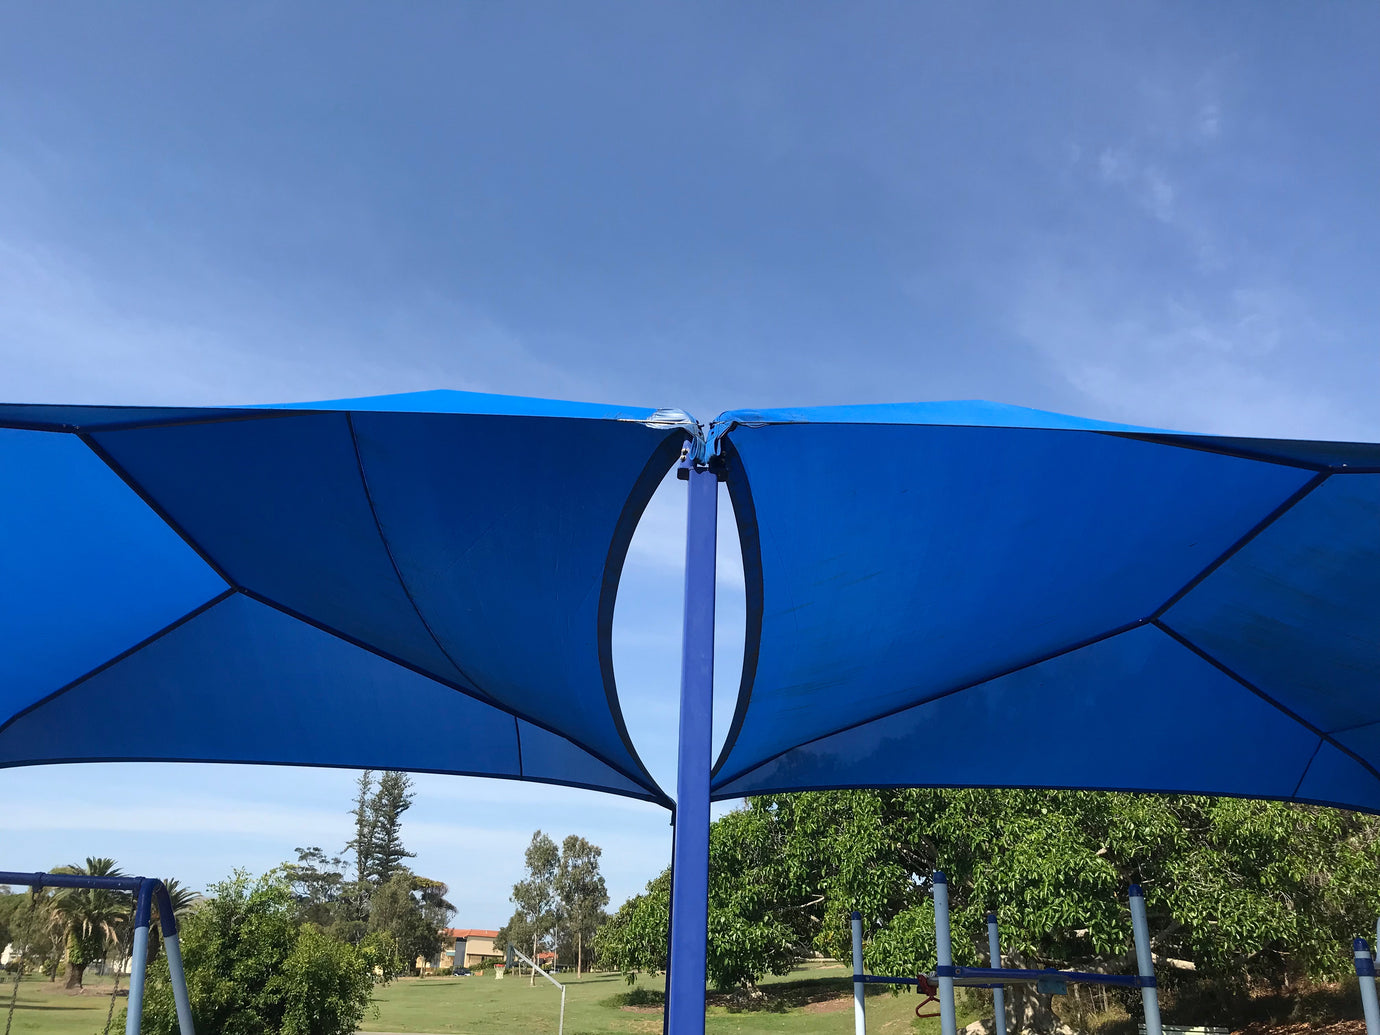 Close-up view of a vibrant blue pop-up sun shelter, with sturdy fabric and collapsible frame for outdoor shade and protection.